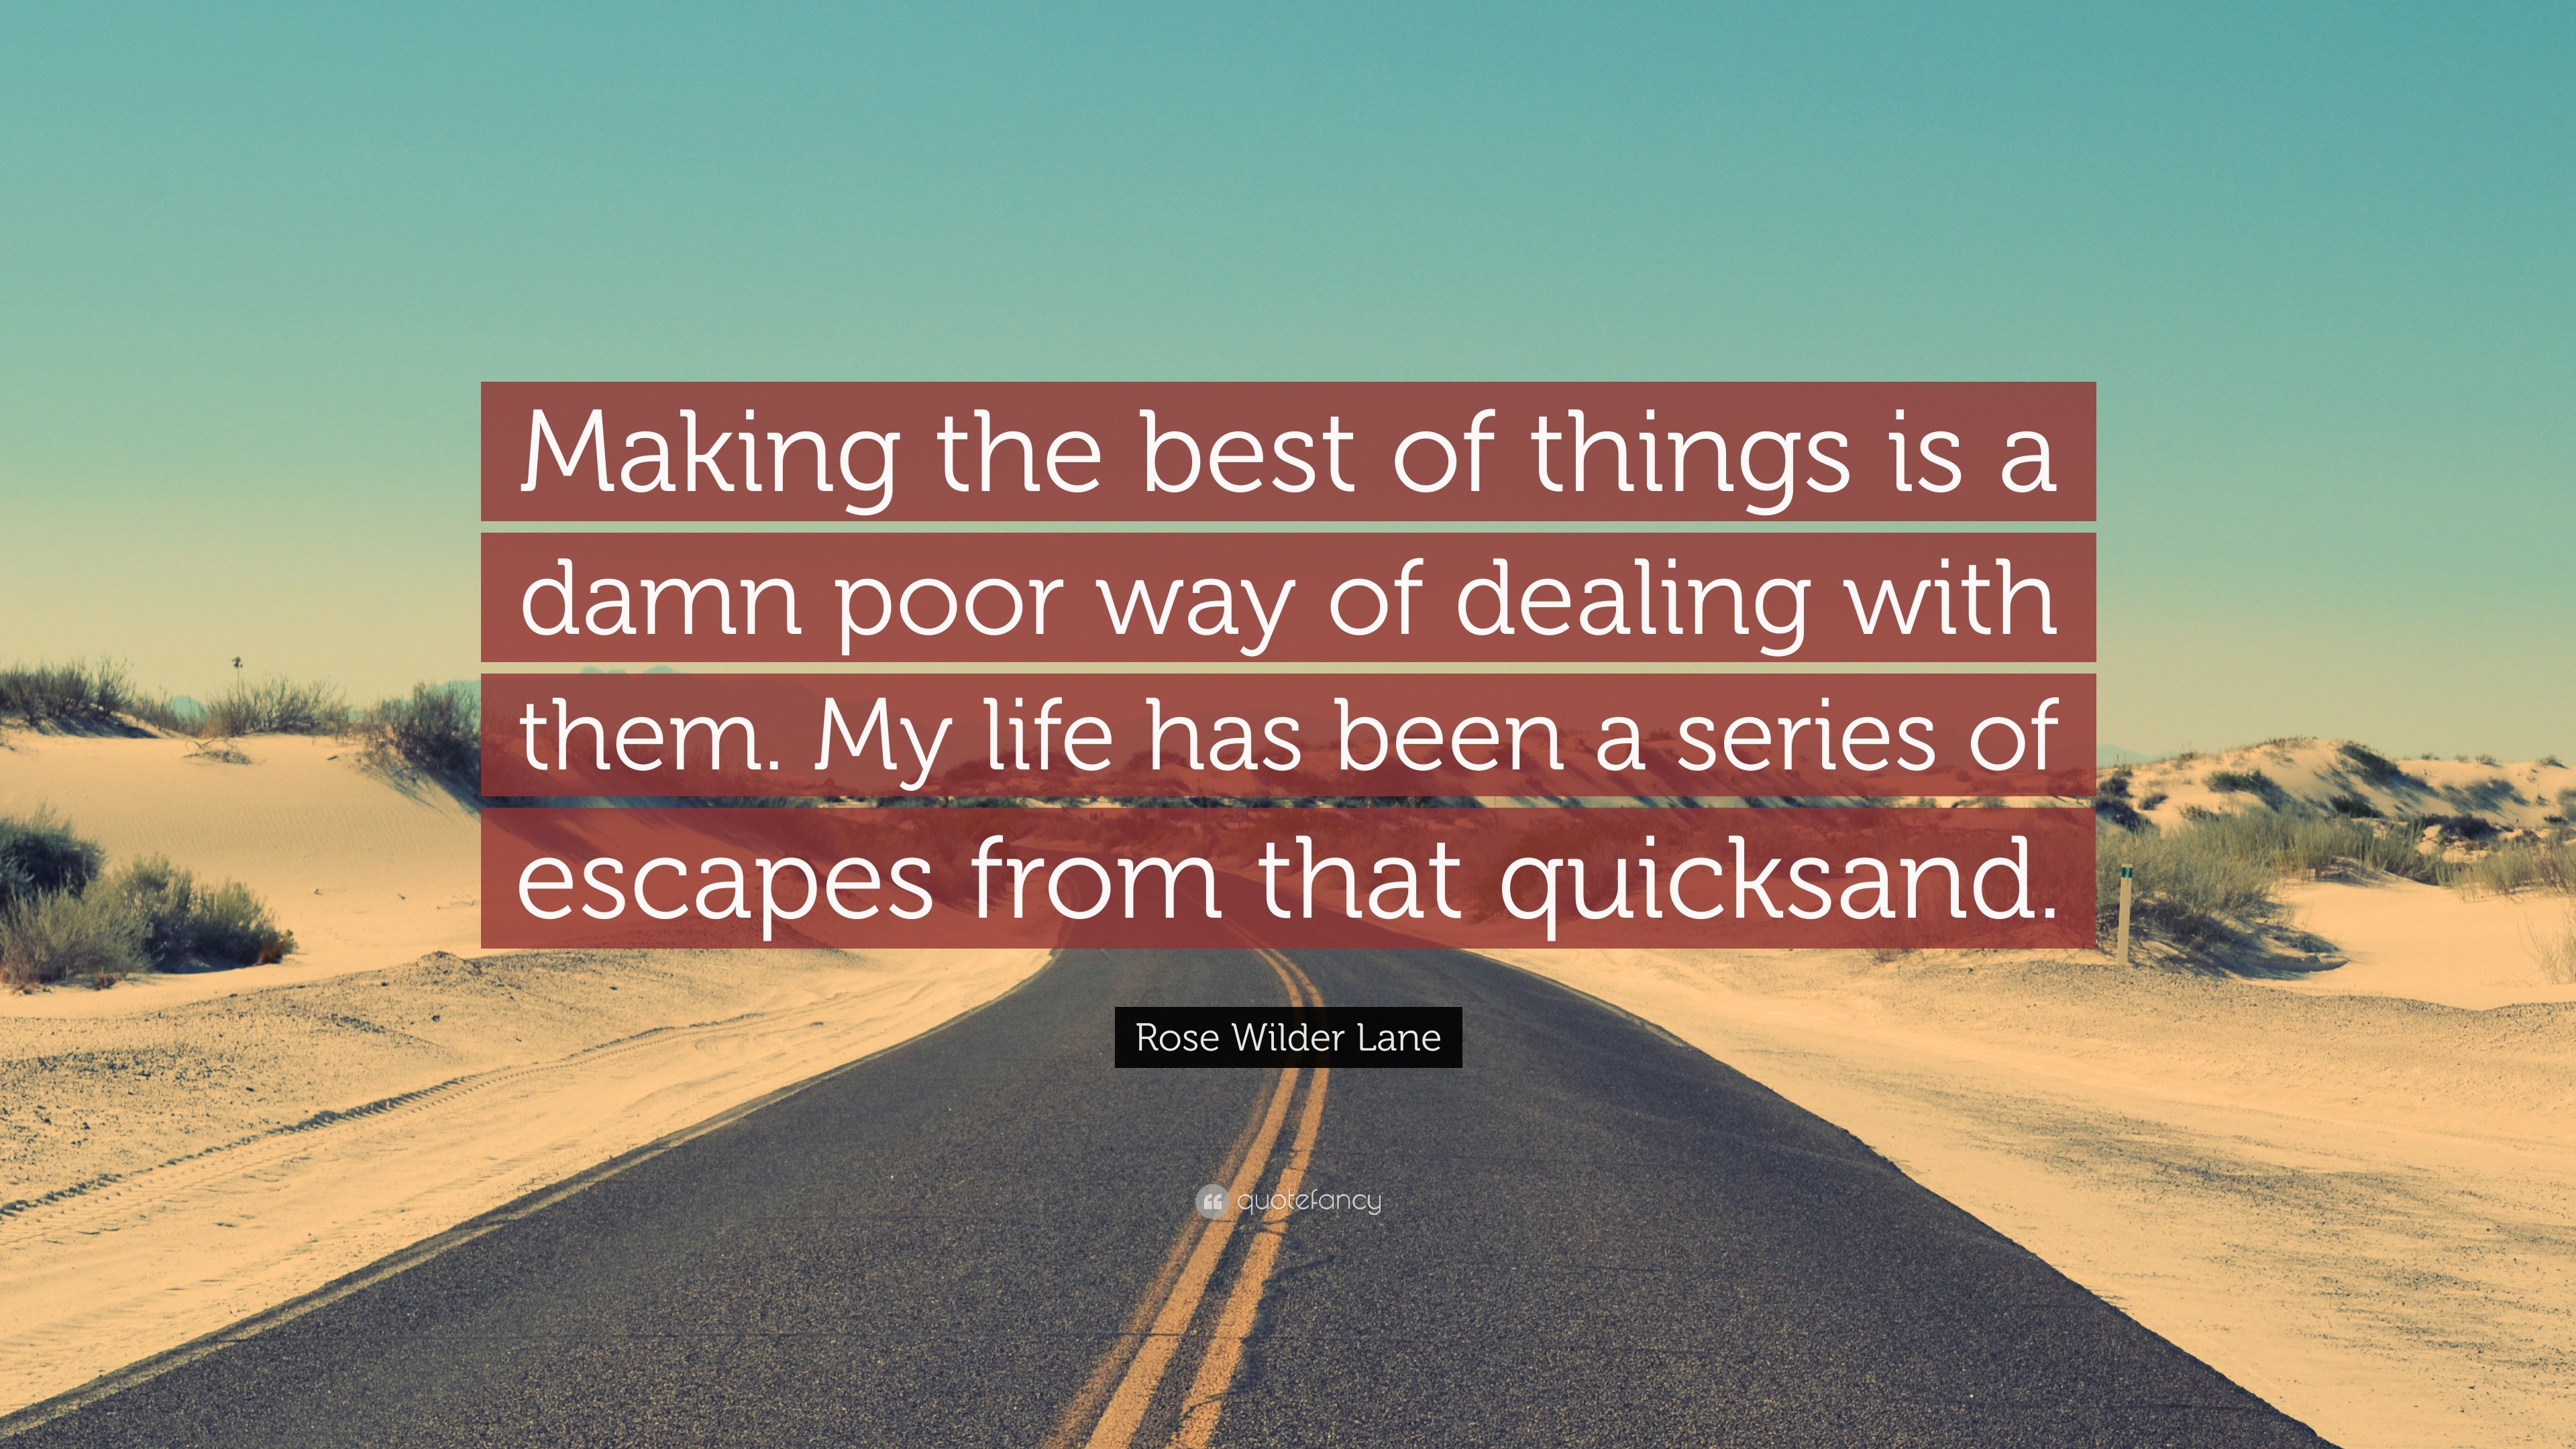 Rose Wilder Lane Quote: “Making The Best Of Things Is A Damn Poor Way Of Dealing With Them. My Life Has Been A Series Of Escapes From That Quicks...”